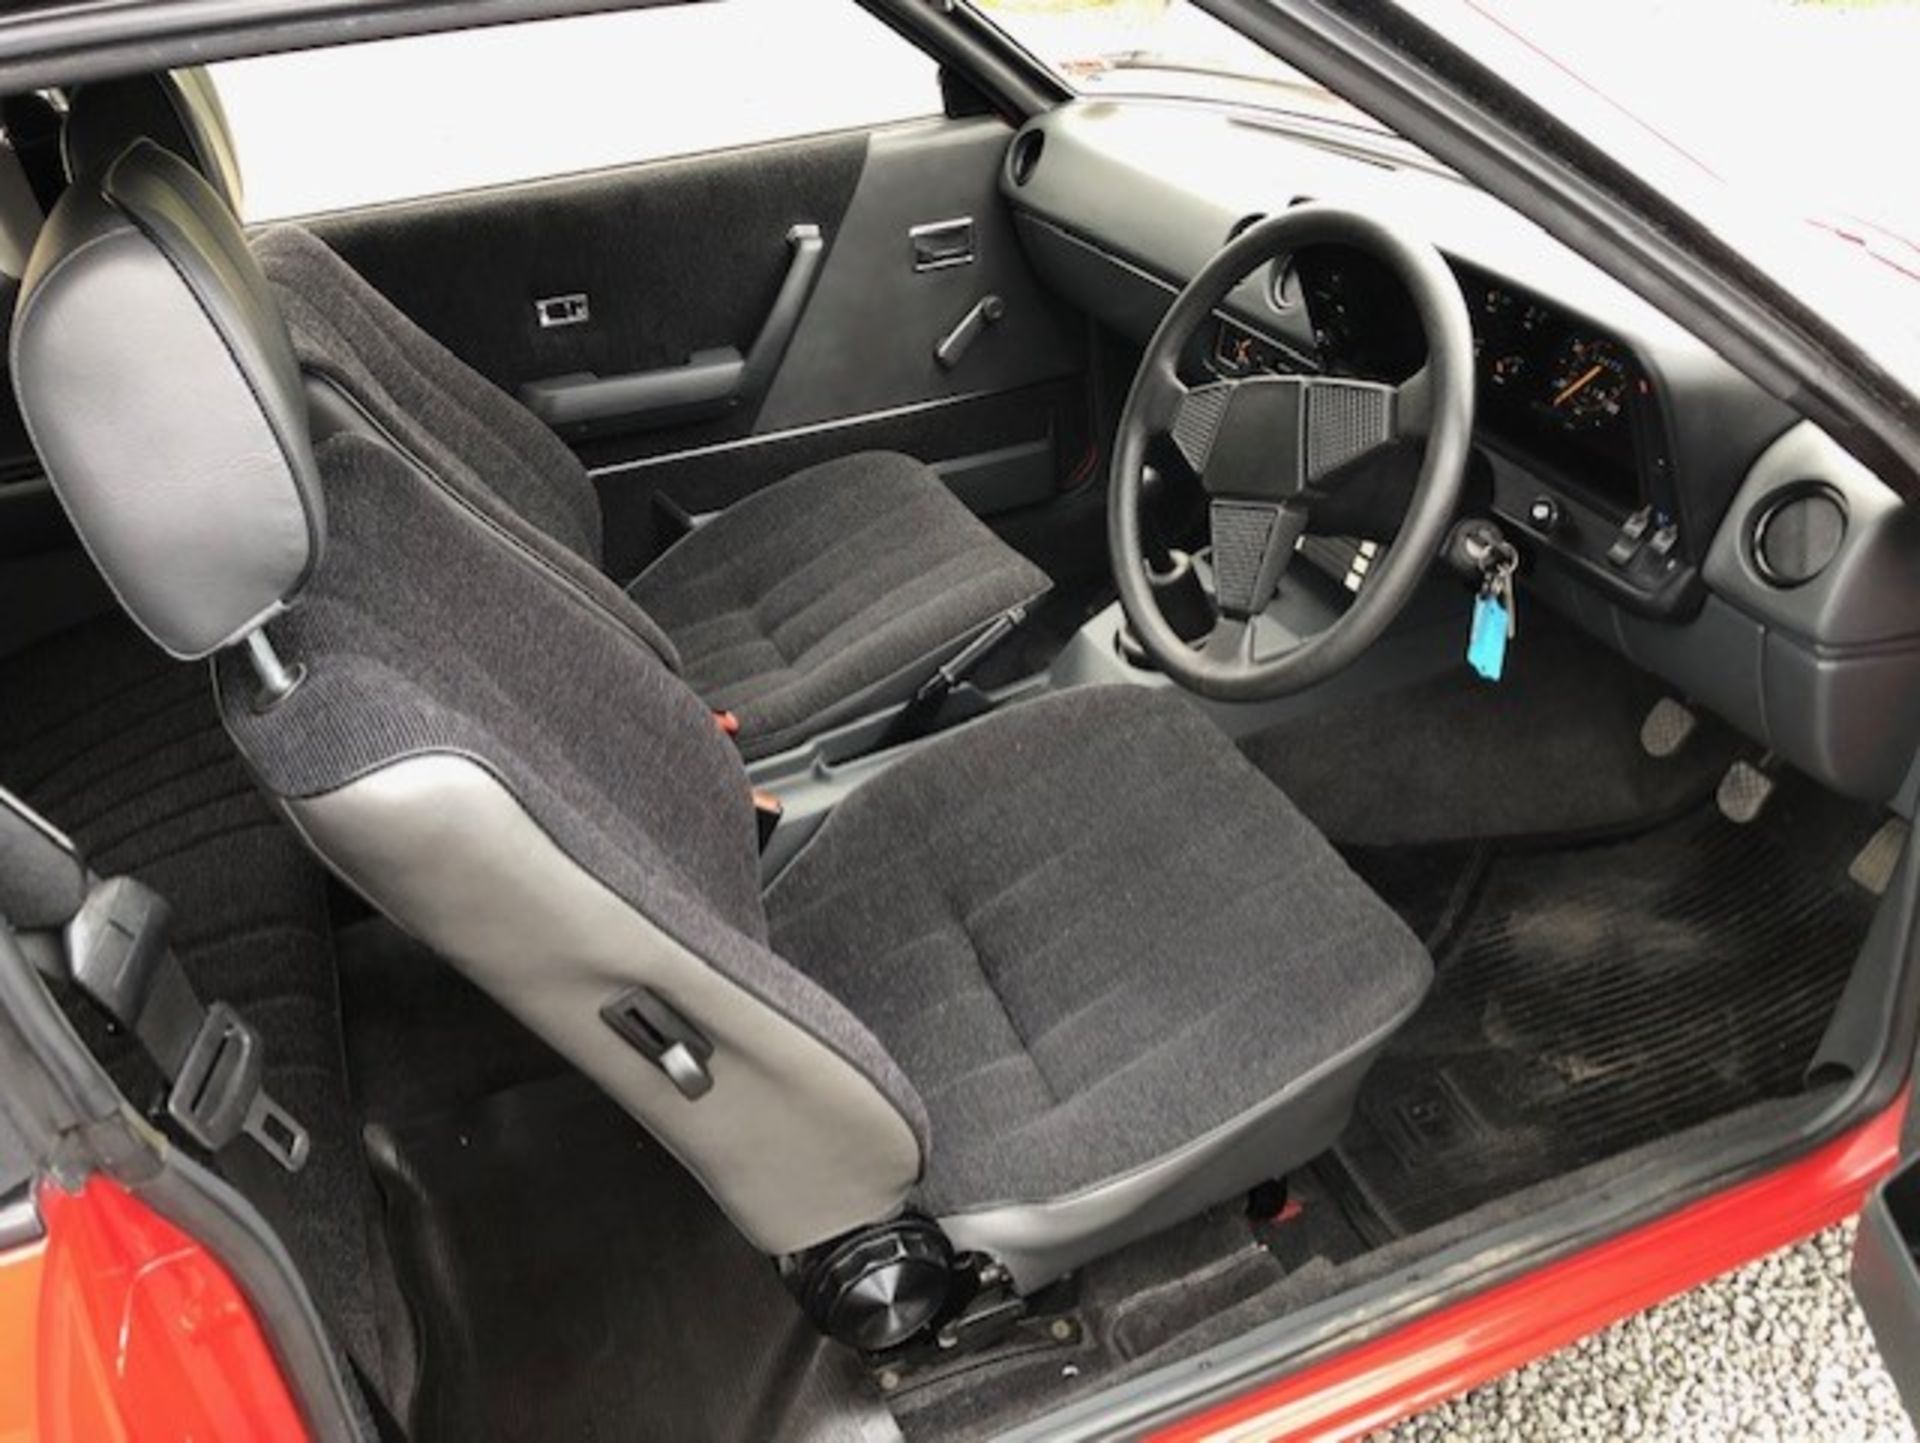 1983 Opel Manta 1.8GT 13,990 miles from new - Image 4 of 7